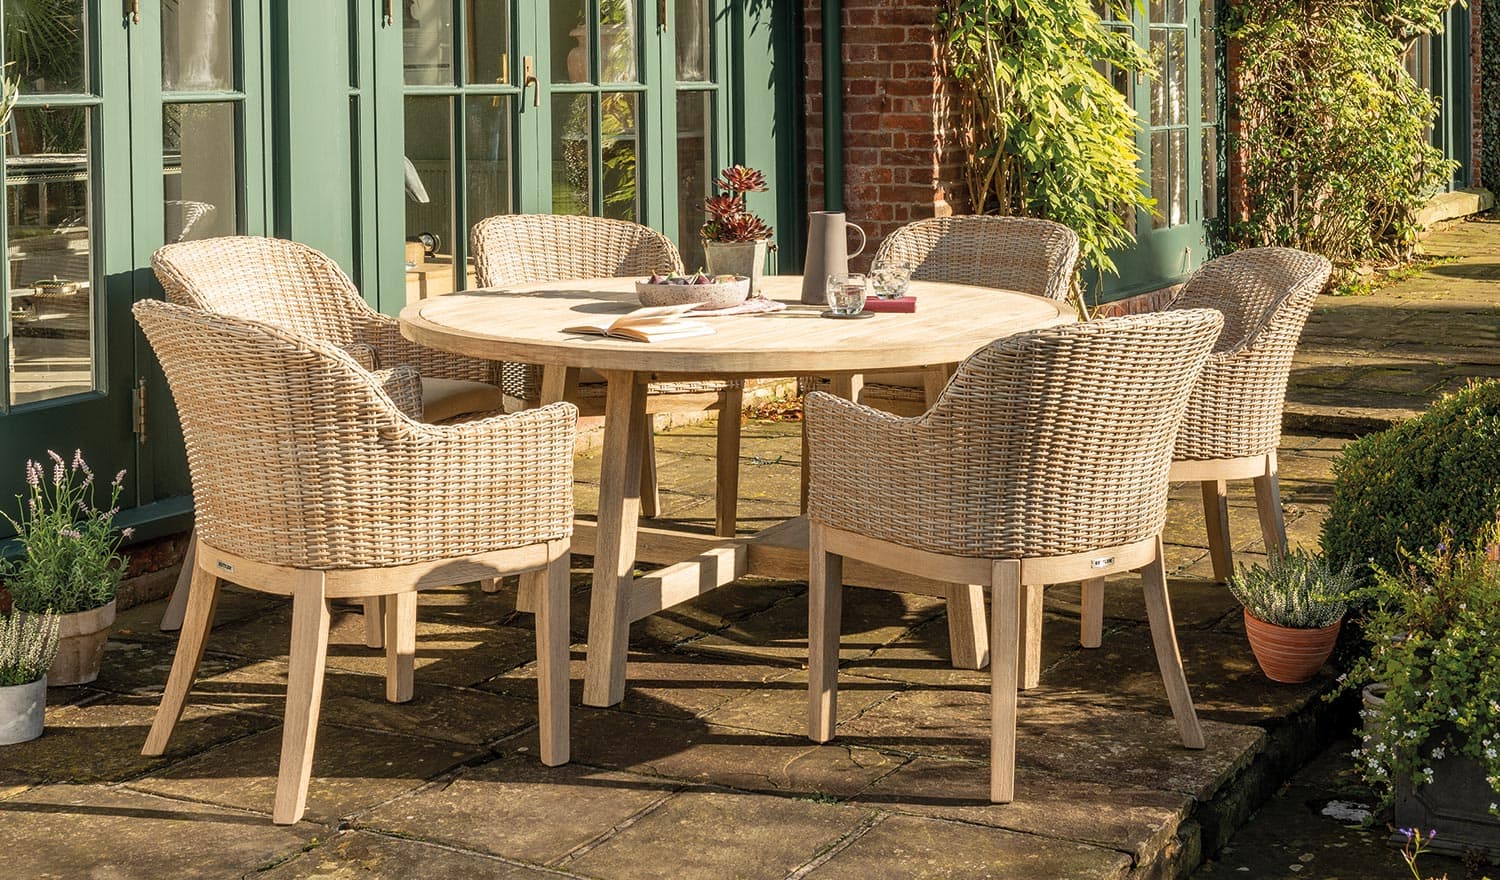 Cora 120cm Round Dining Table 4 Seater, Round Wooden Table Garden Furniture